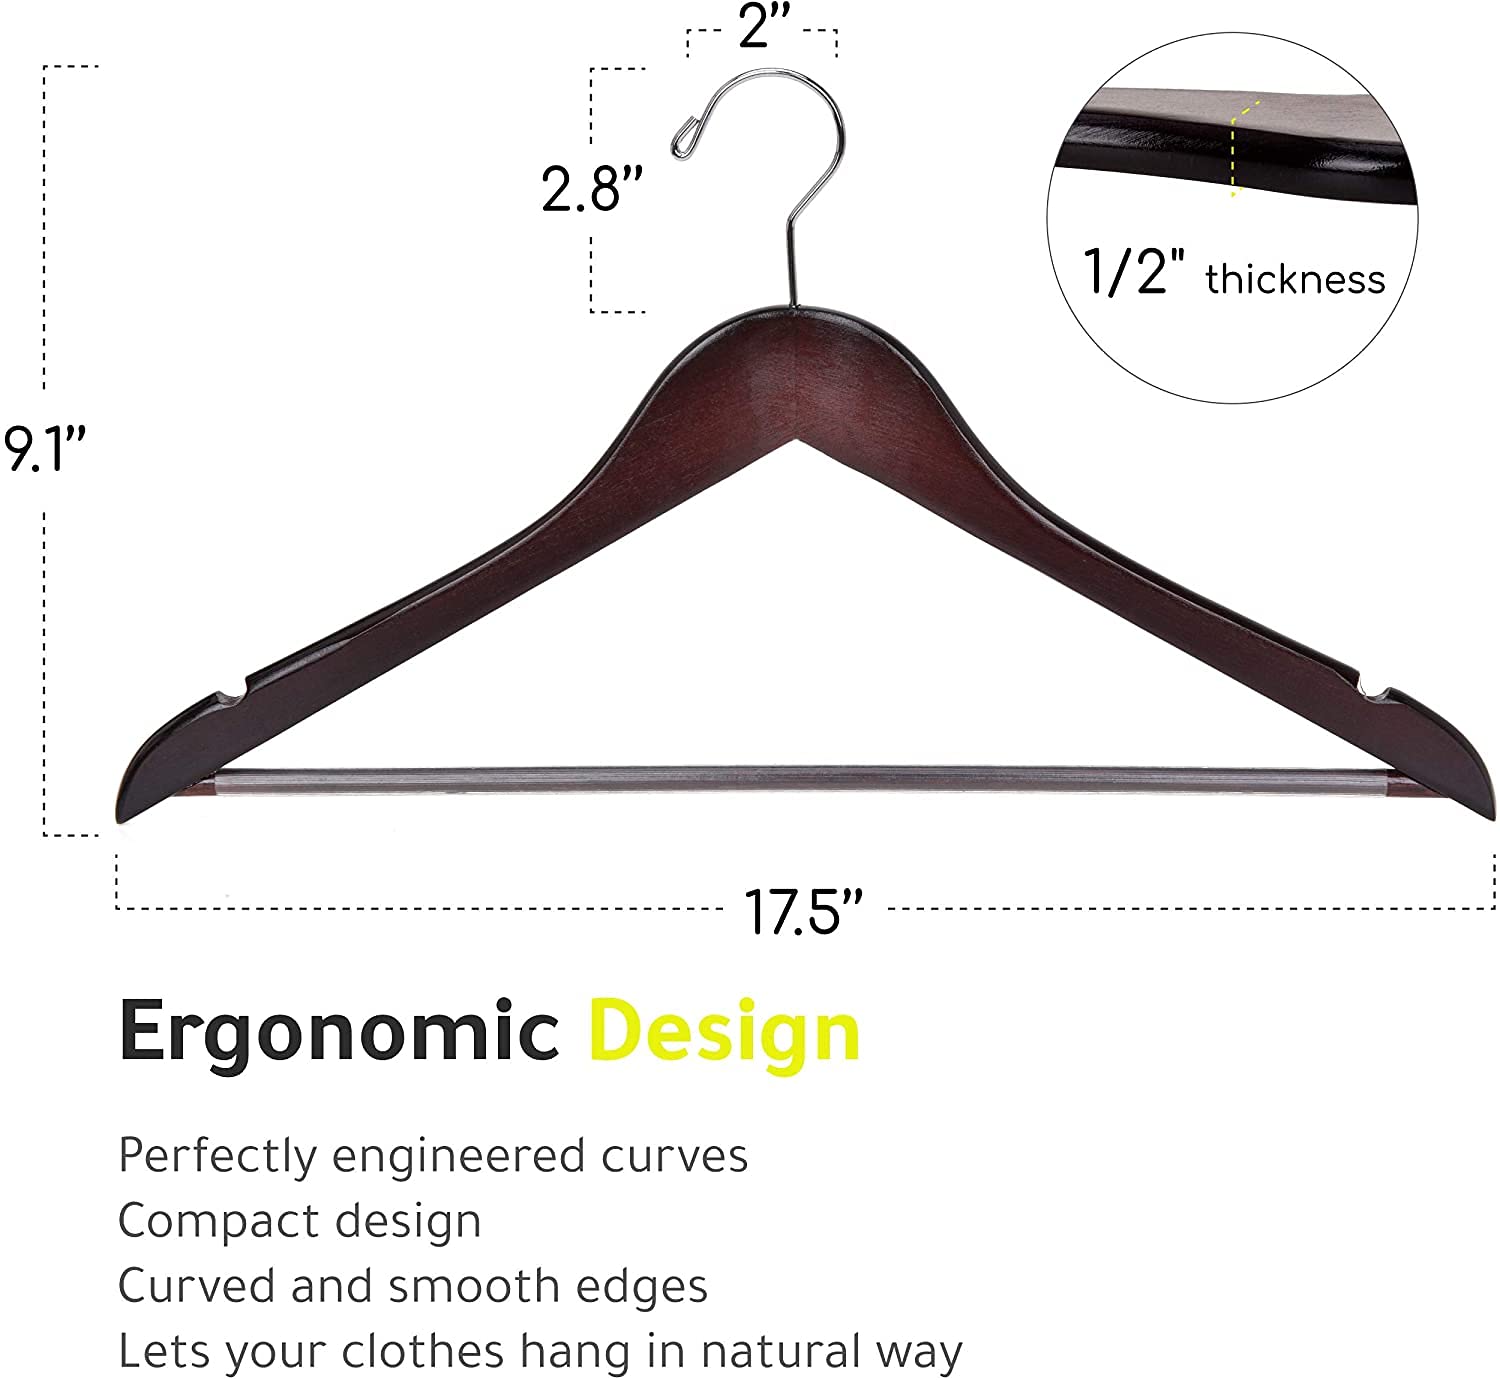 Quality Wooden Hangers - Slightly Curved Hanger 30-Pack Sets - Solid Wood Coat Hangers with Stylish Chrome Hooks - Heavy-Duty Clothes, Jacket, Shirt, Pants, Suit Hangers (Mahogany, 30)  - Like New